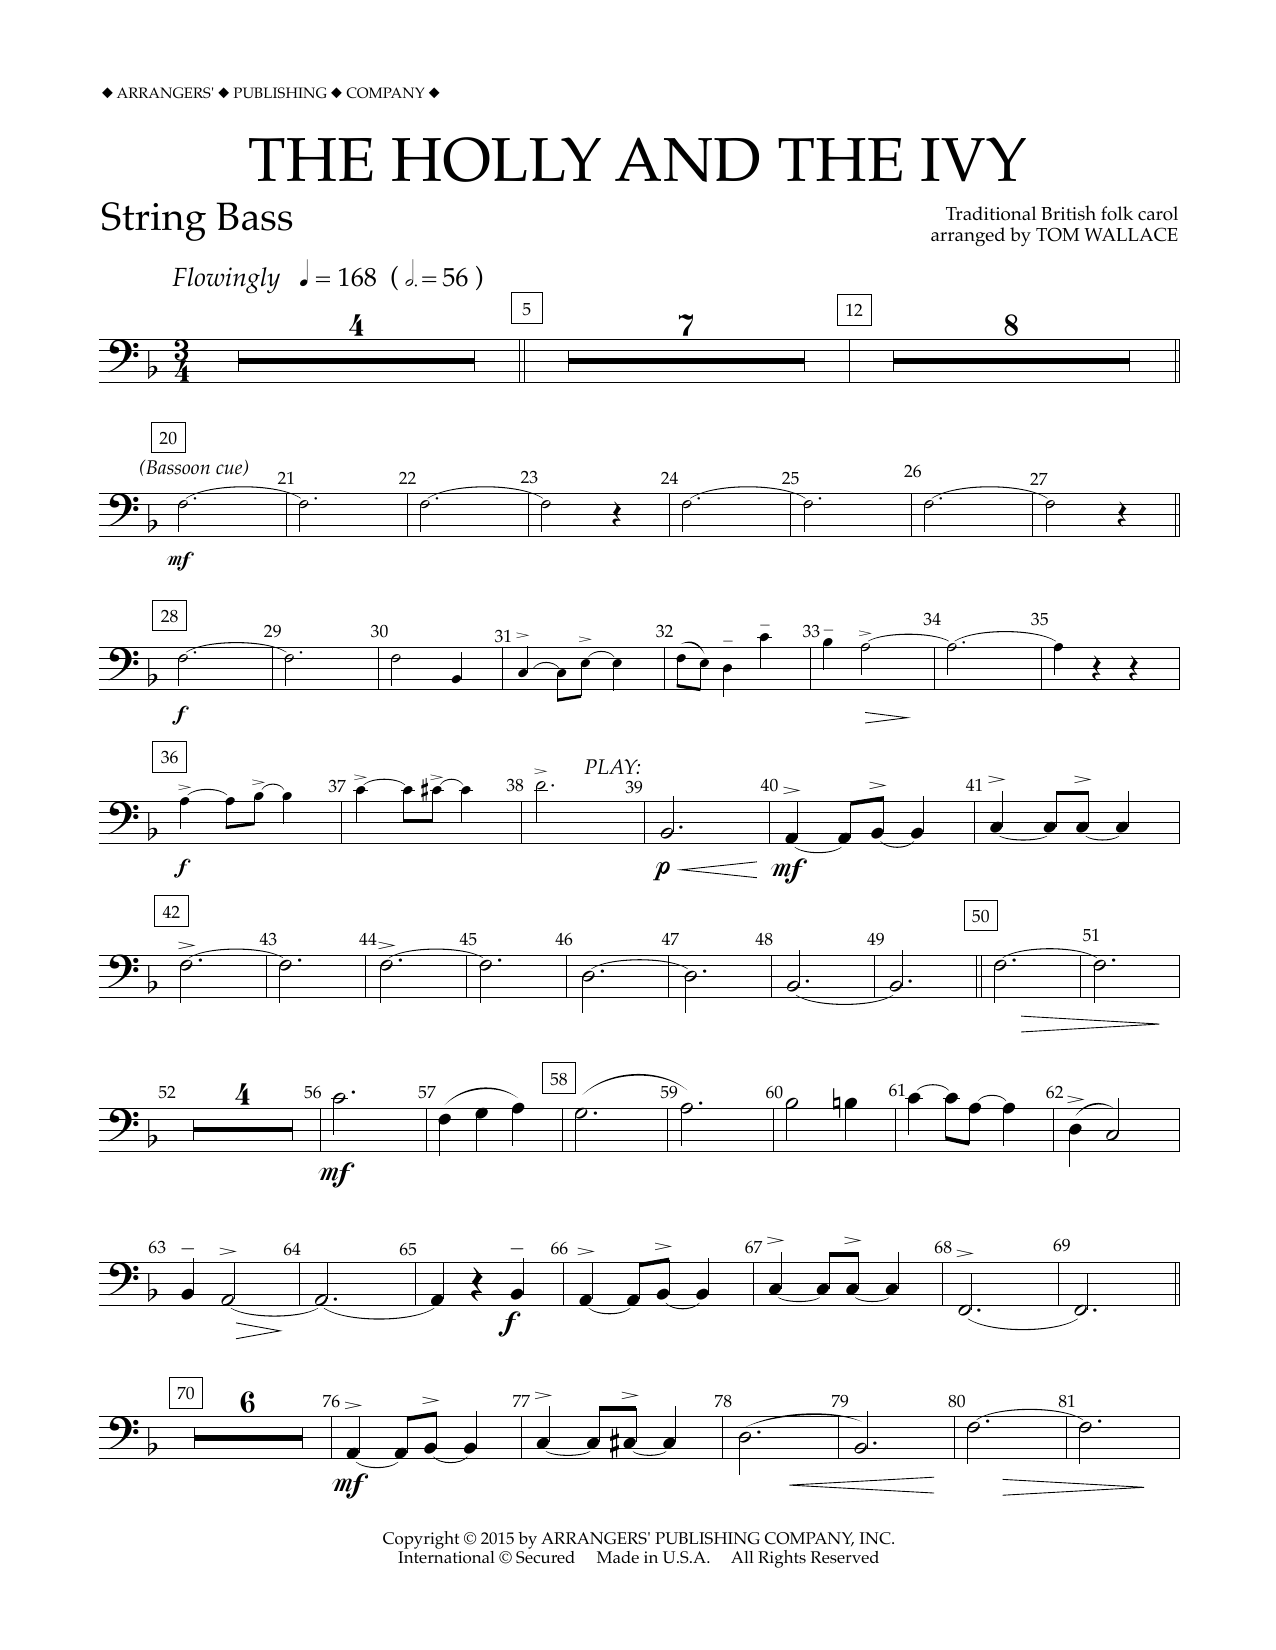 Download Tom Wallace The Holly and the Ivy - String Bass Sheet Music